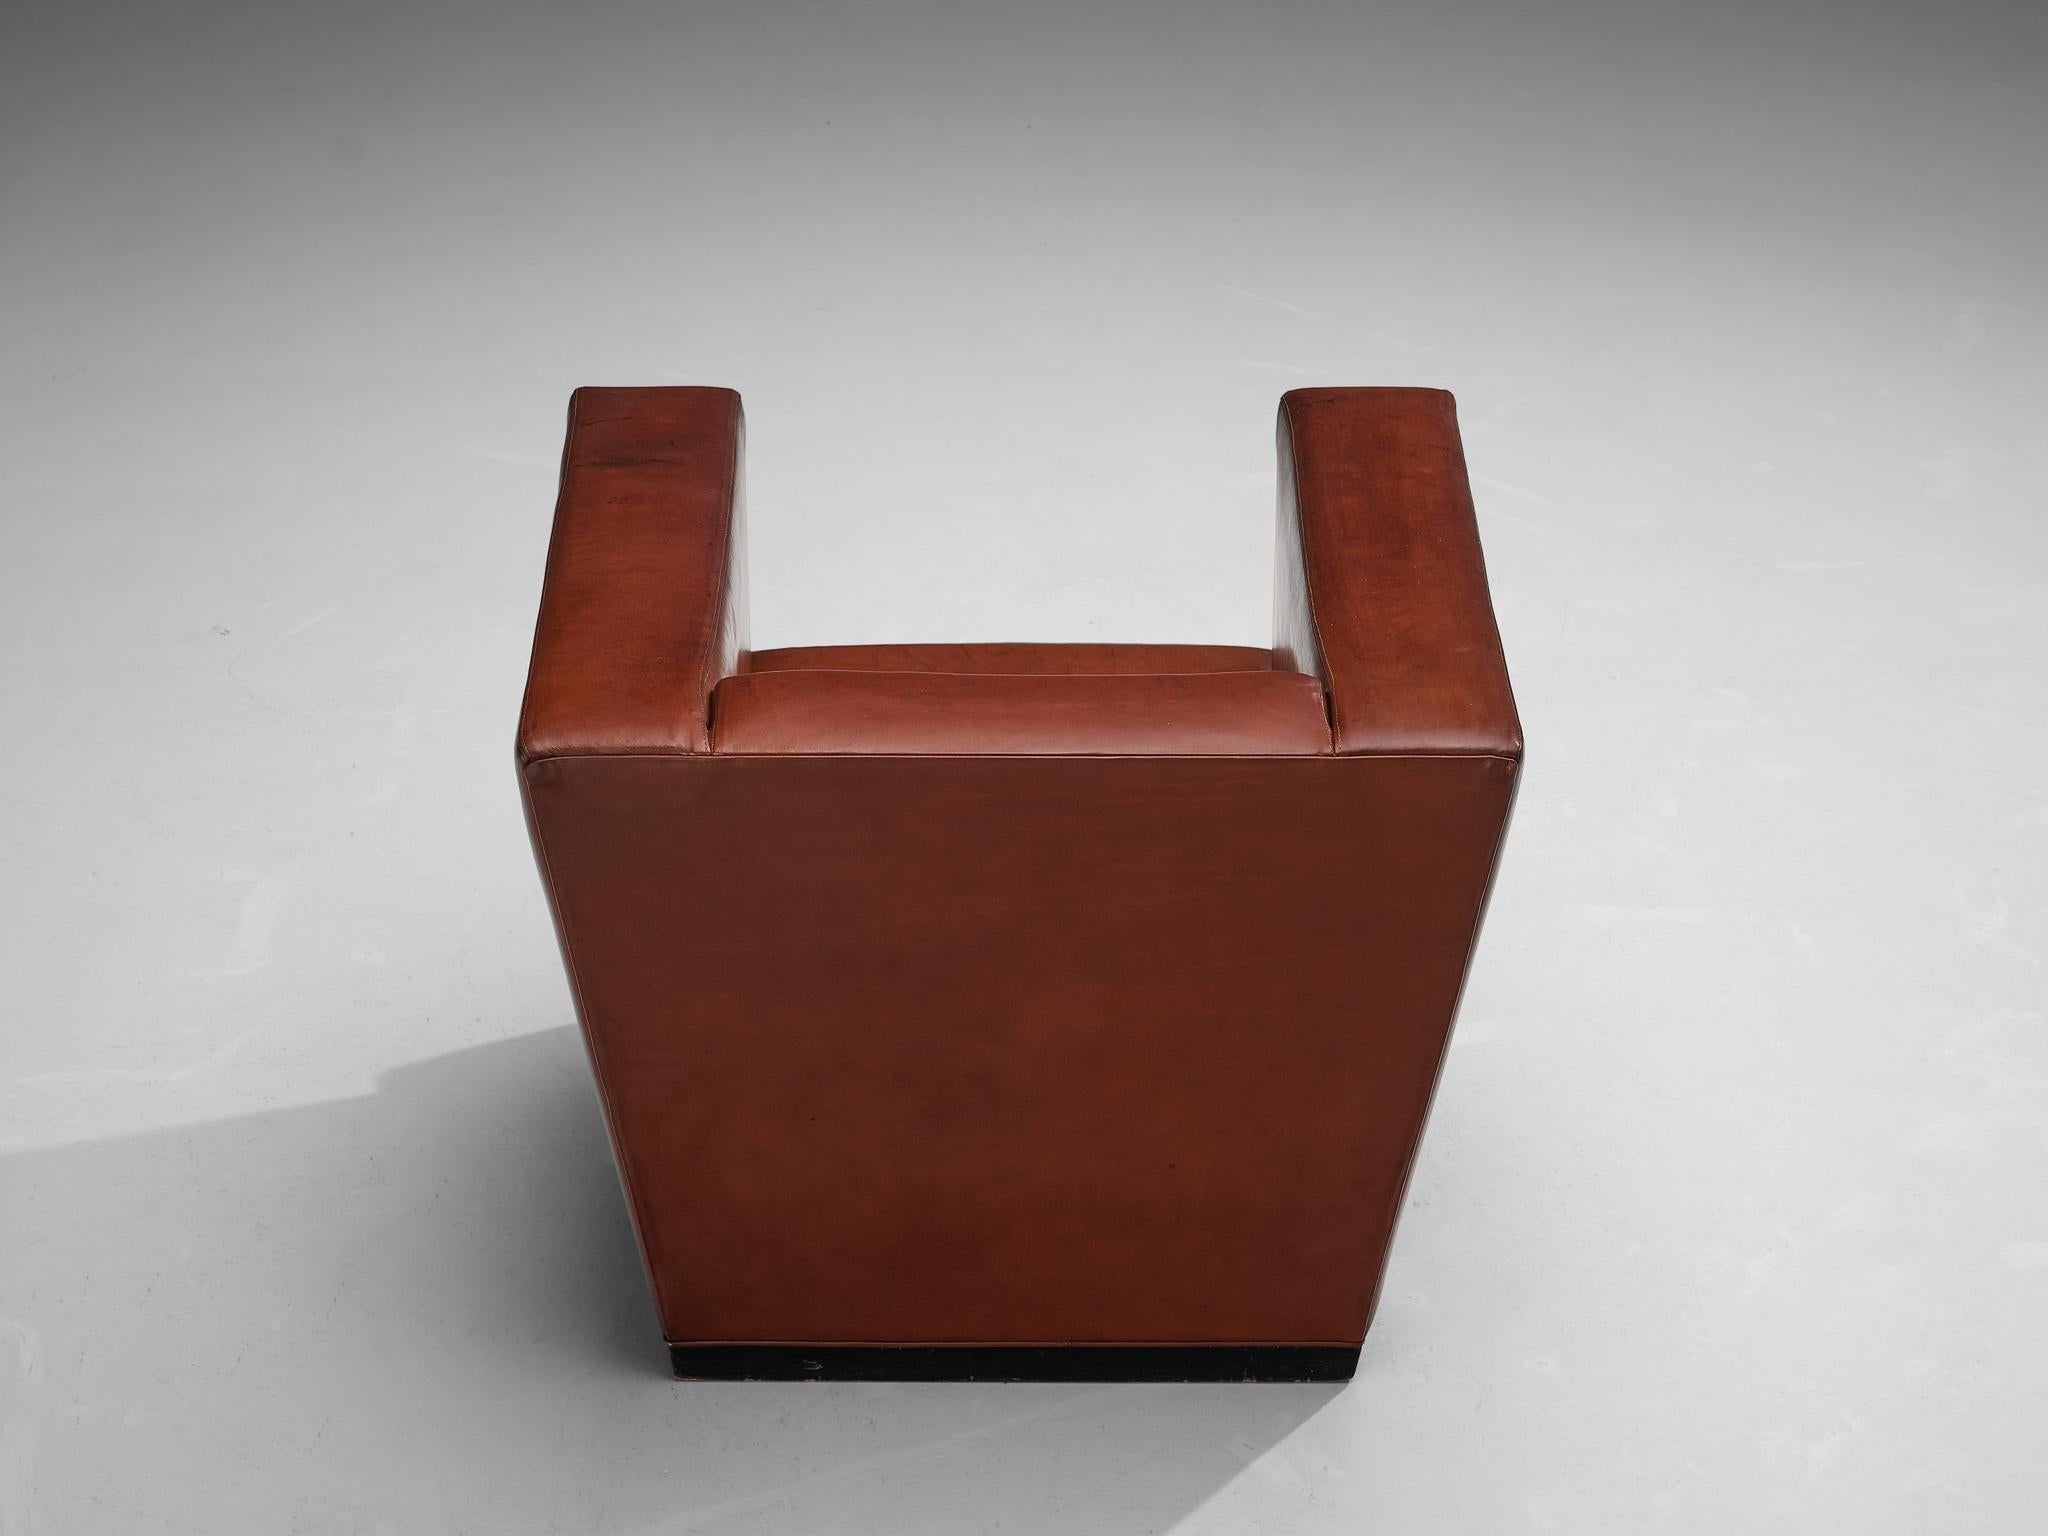 Rare Axel Einar Hjorth ‘Lido’ Lounge Chair in Patinated Leather